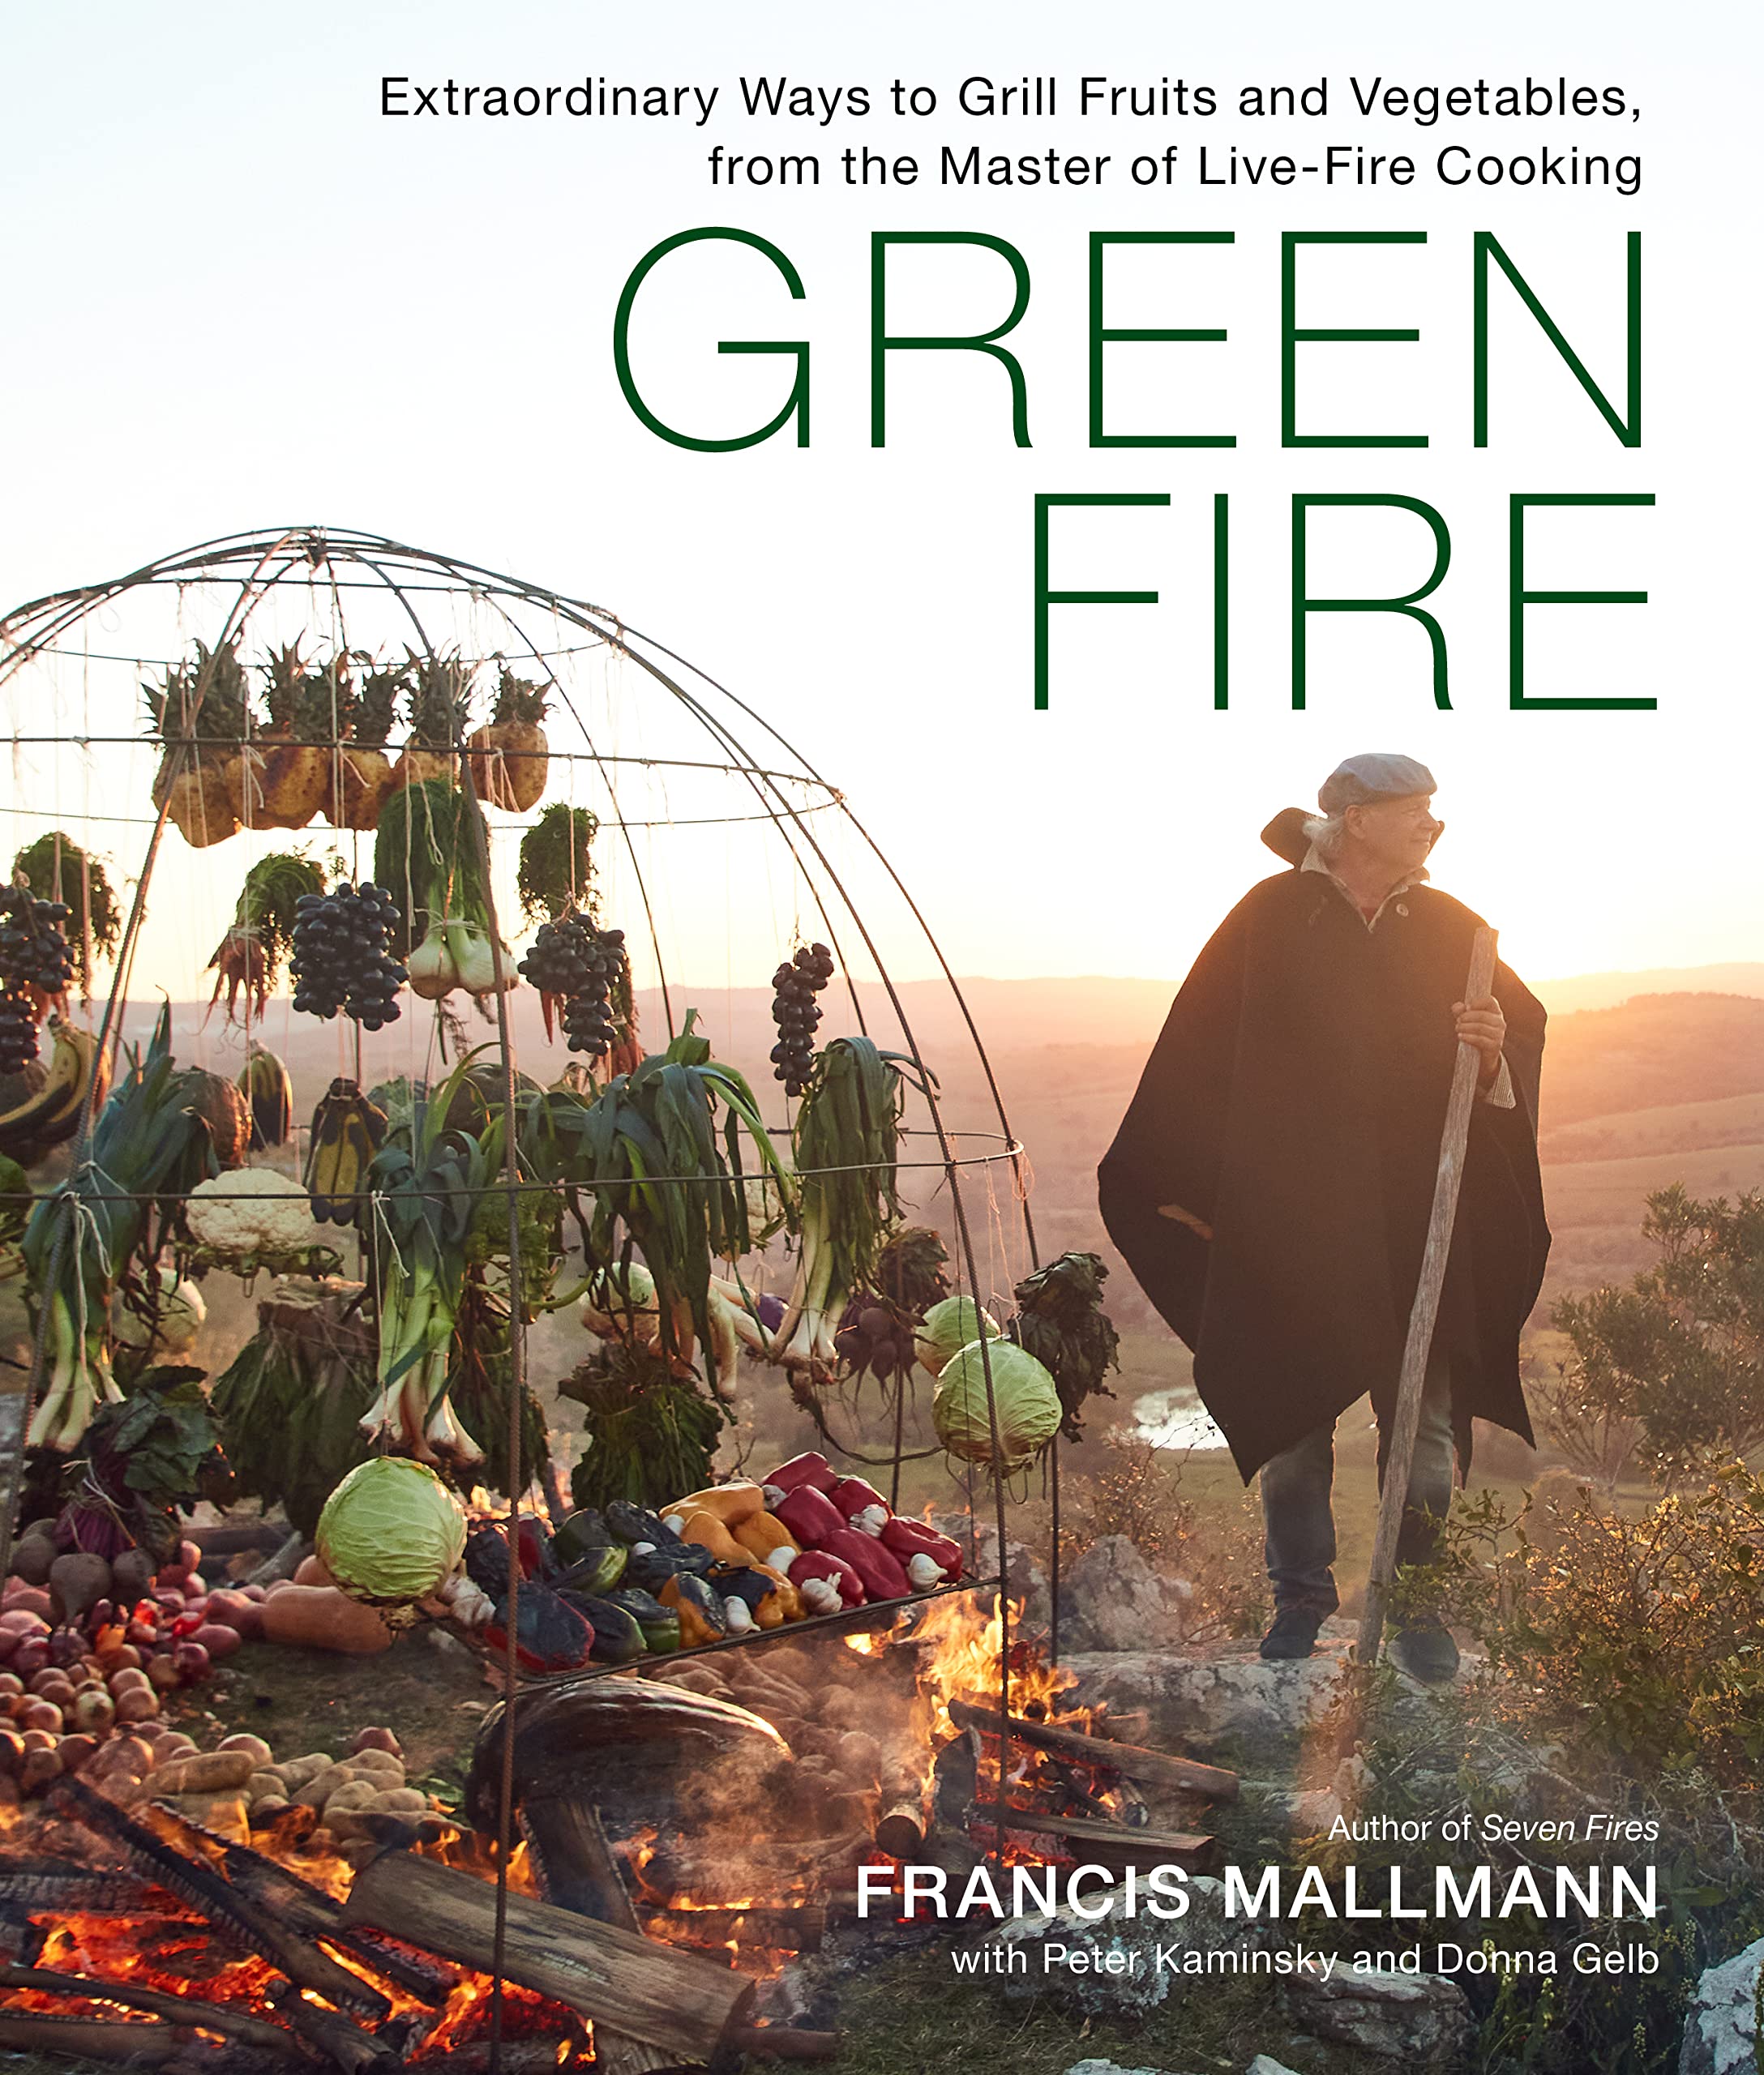 Green Fire: Extraordinary Ways to Grill Fruits and Vegetables, from the Master of Live-Fire Cooking (Francis Mallmann, Peter Kaminsky) *Signed*